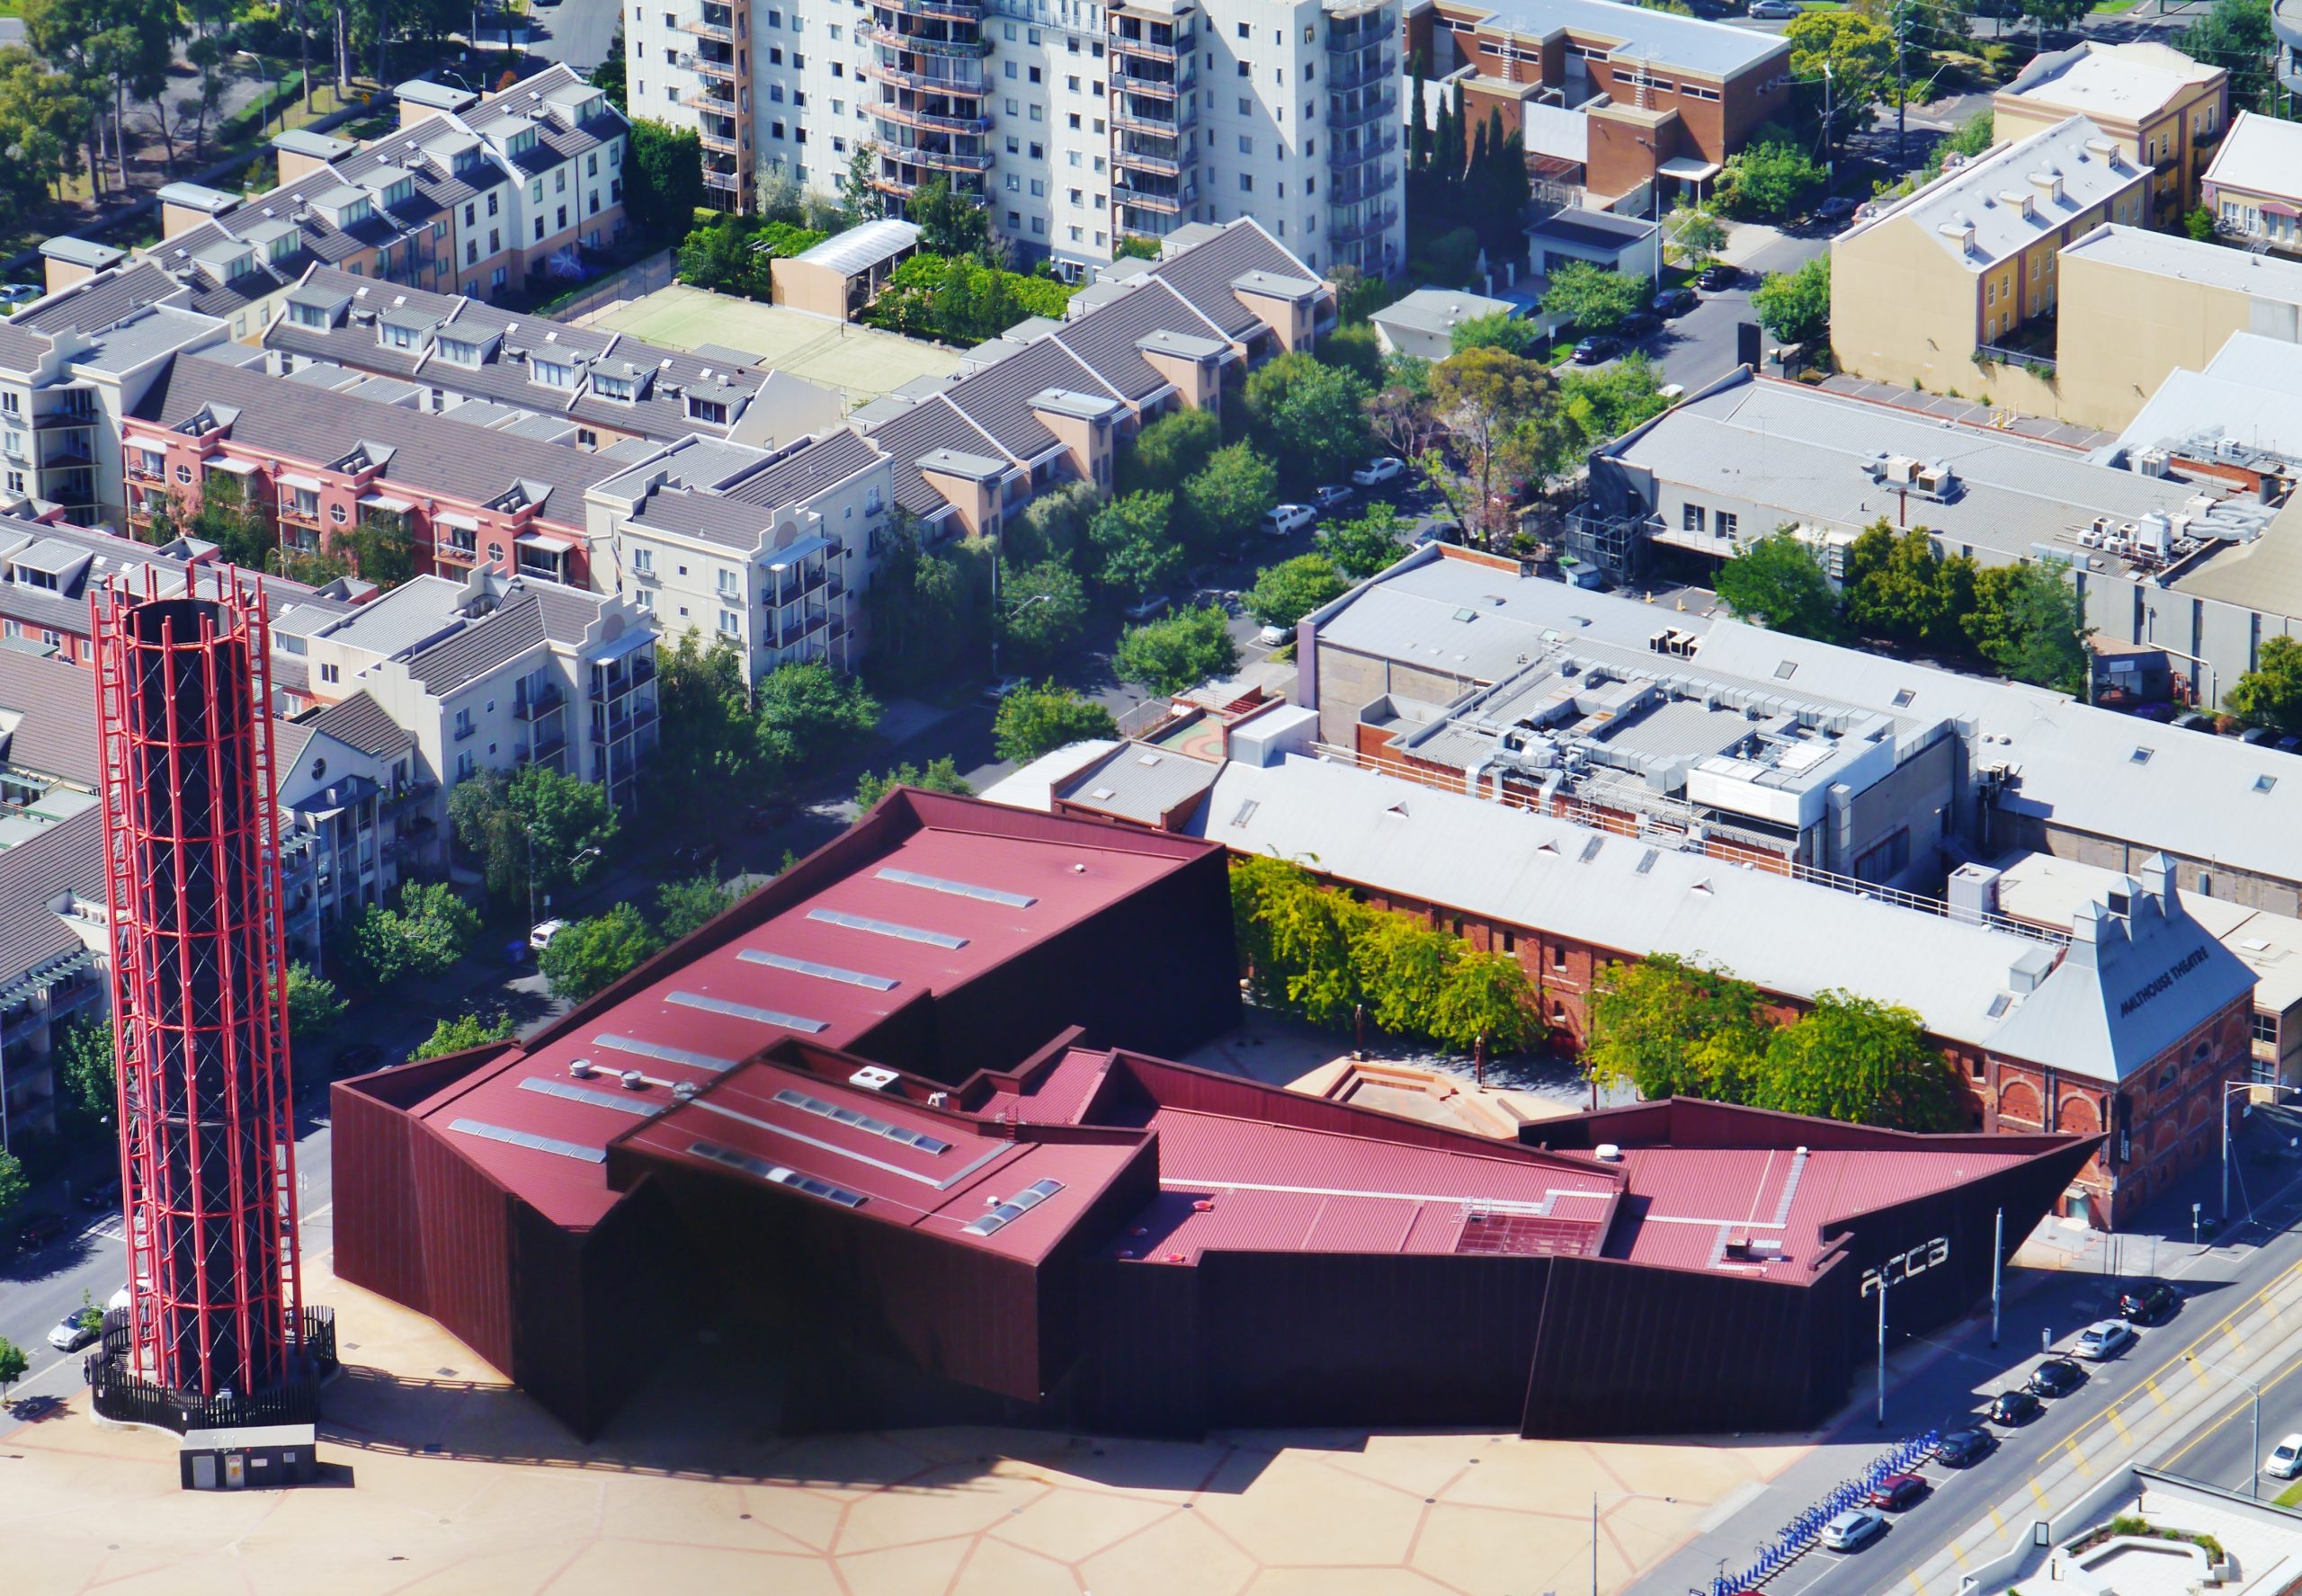 An aerial view of the red rust building of the Australian Centre for Contemporary Art (ACCA) museum in Melbourne, Australia.